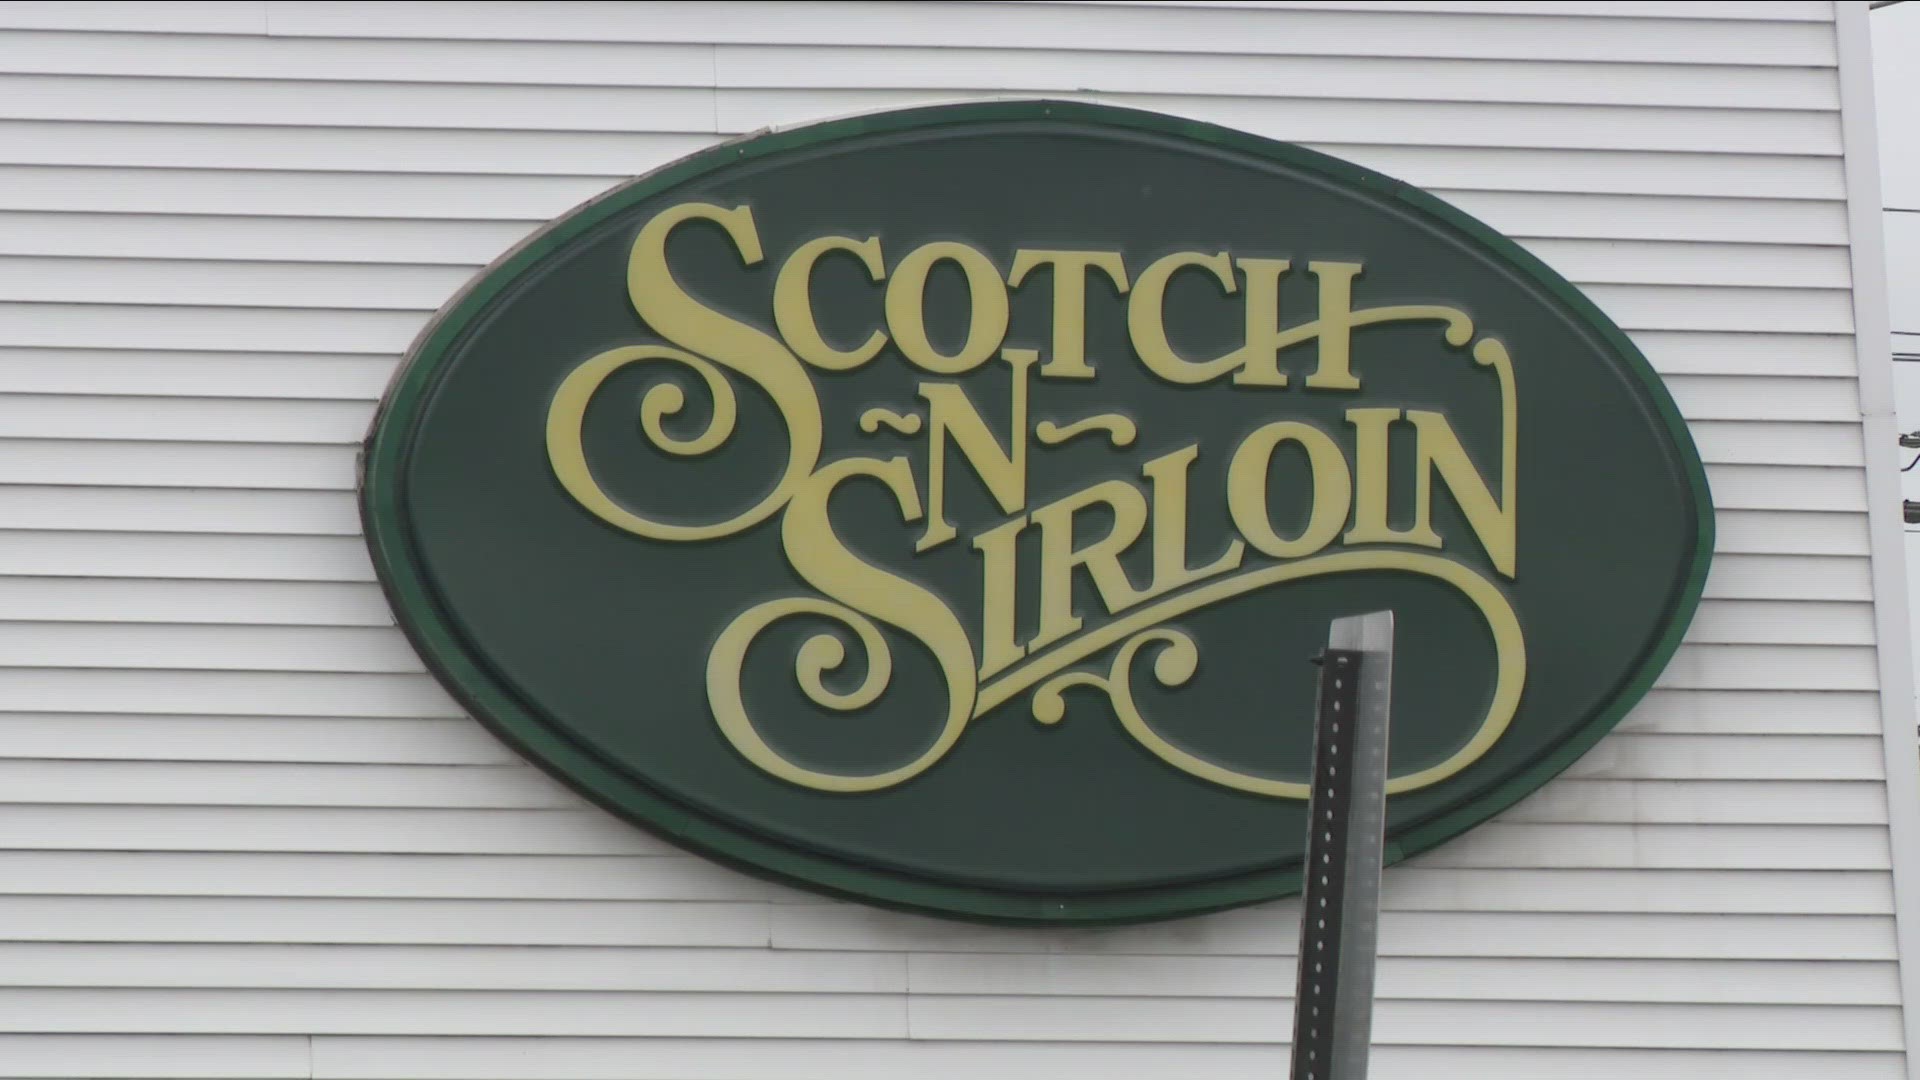 The Scotch and Sirloin restaurant in Amherst to close